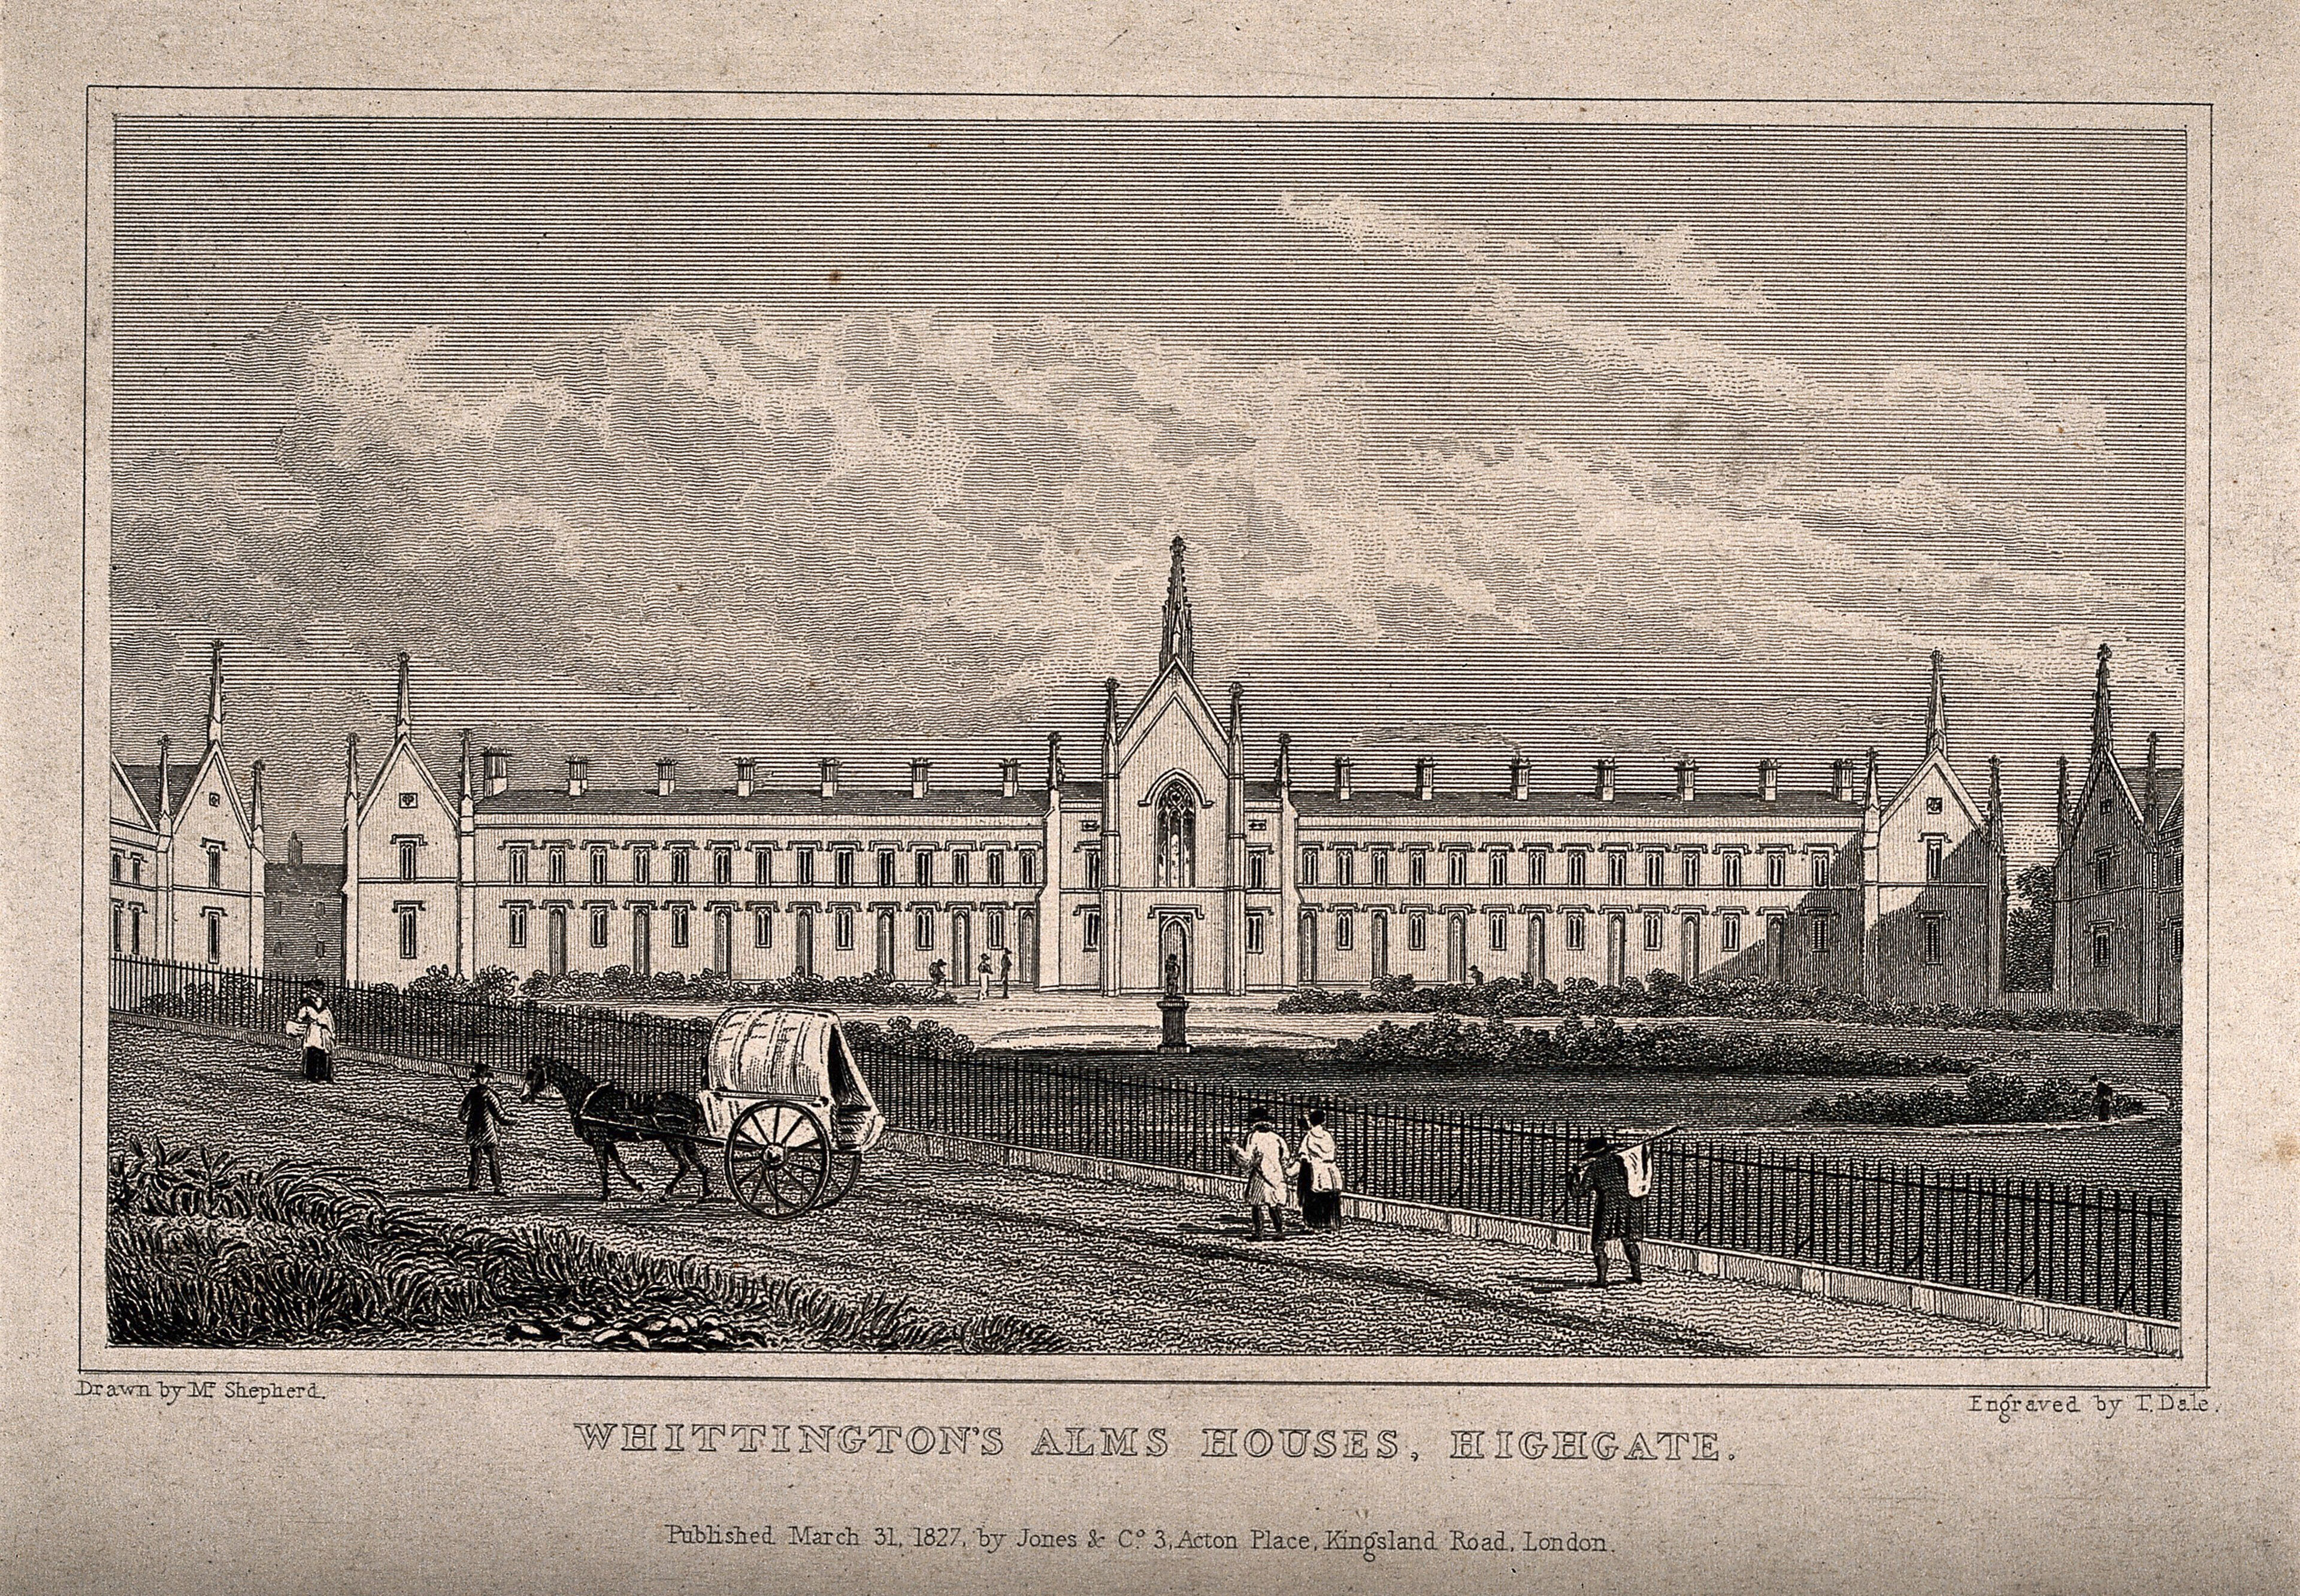 Whittington's Almshouses, Highgate, London: facade. Etching by T. Dale after T.H. Shepherd, 1827.